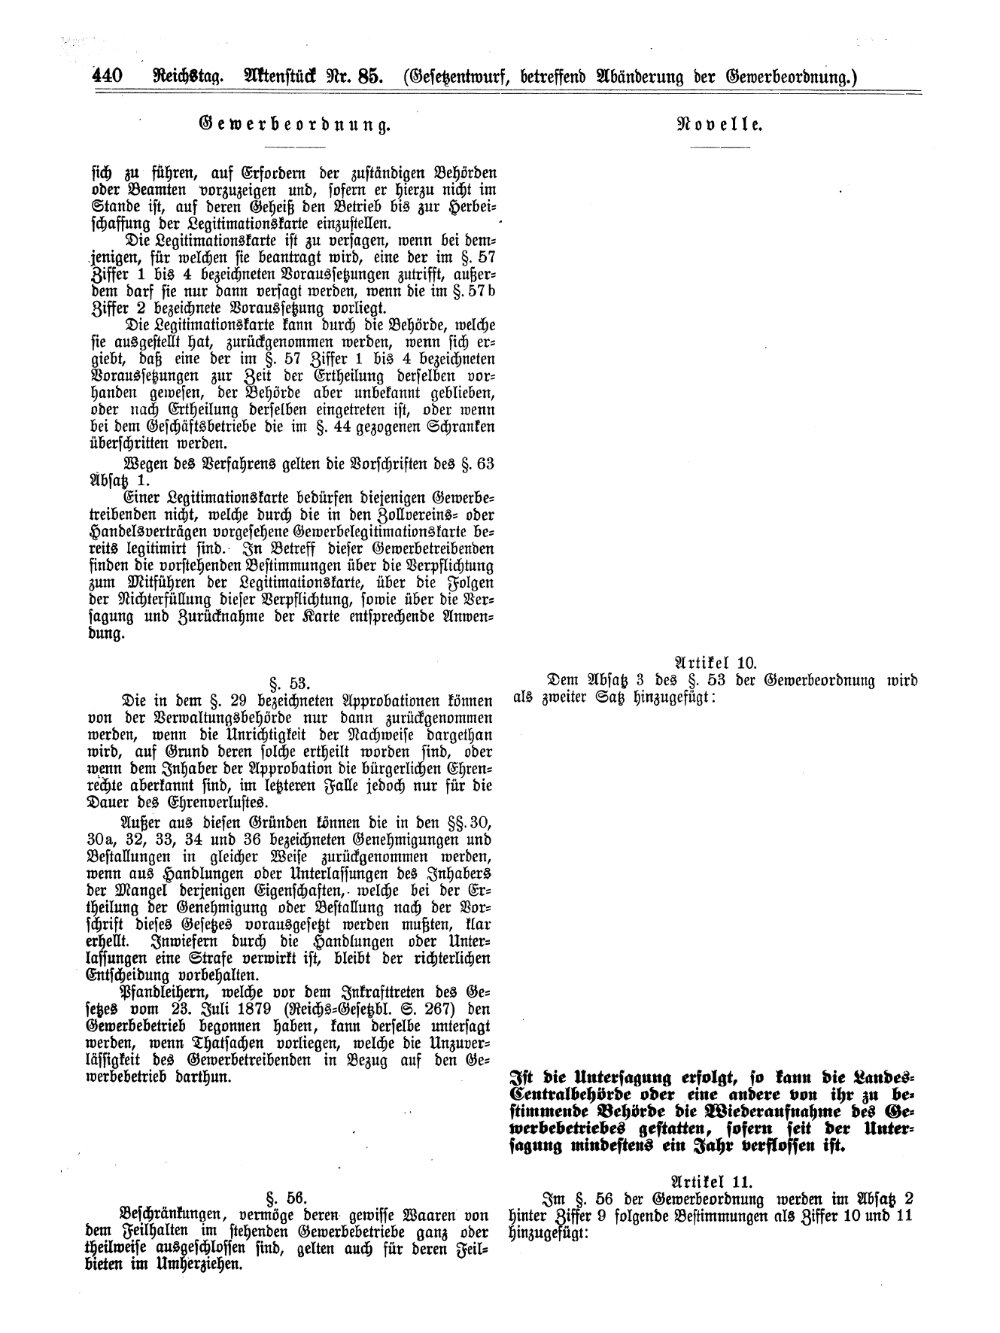 Scan of page 440